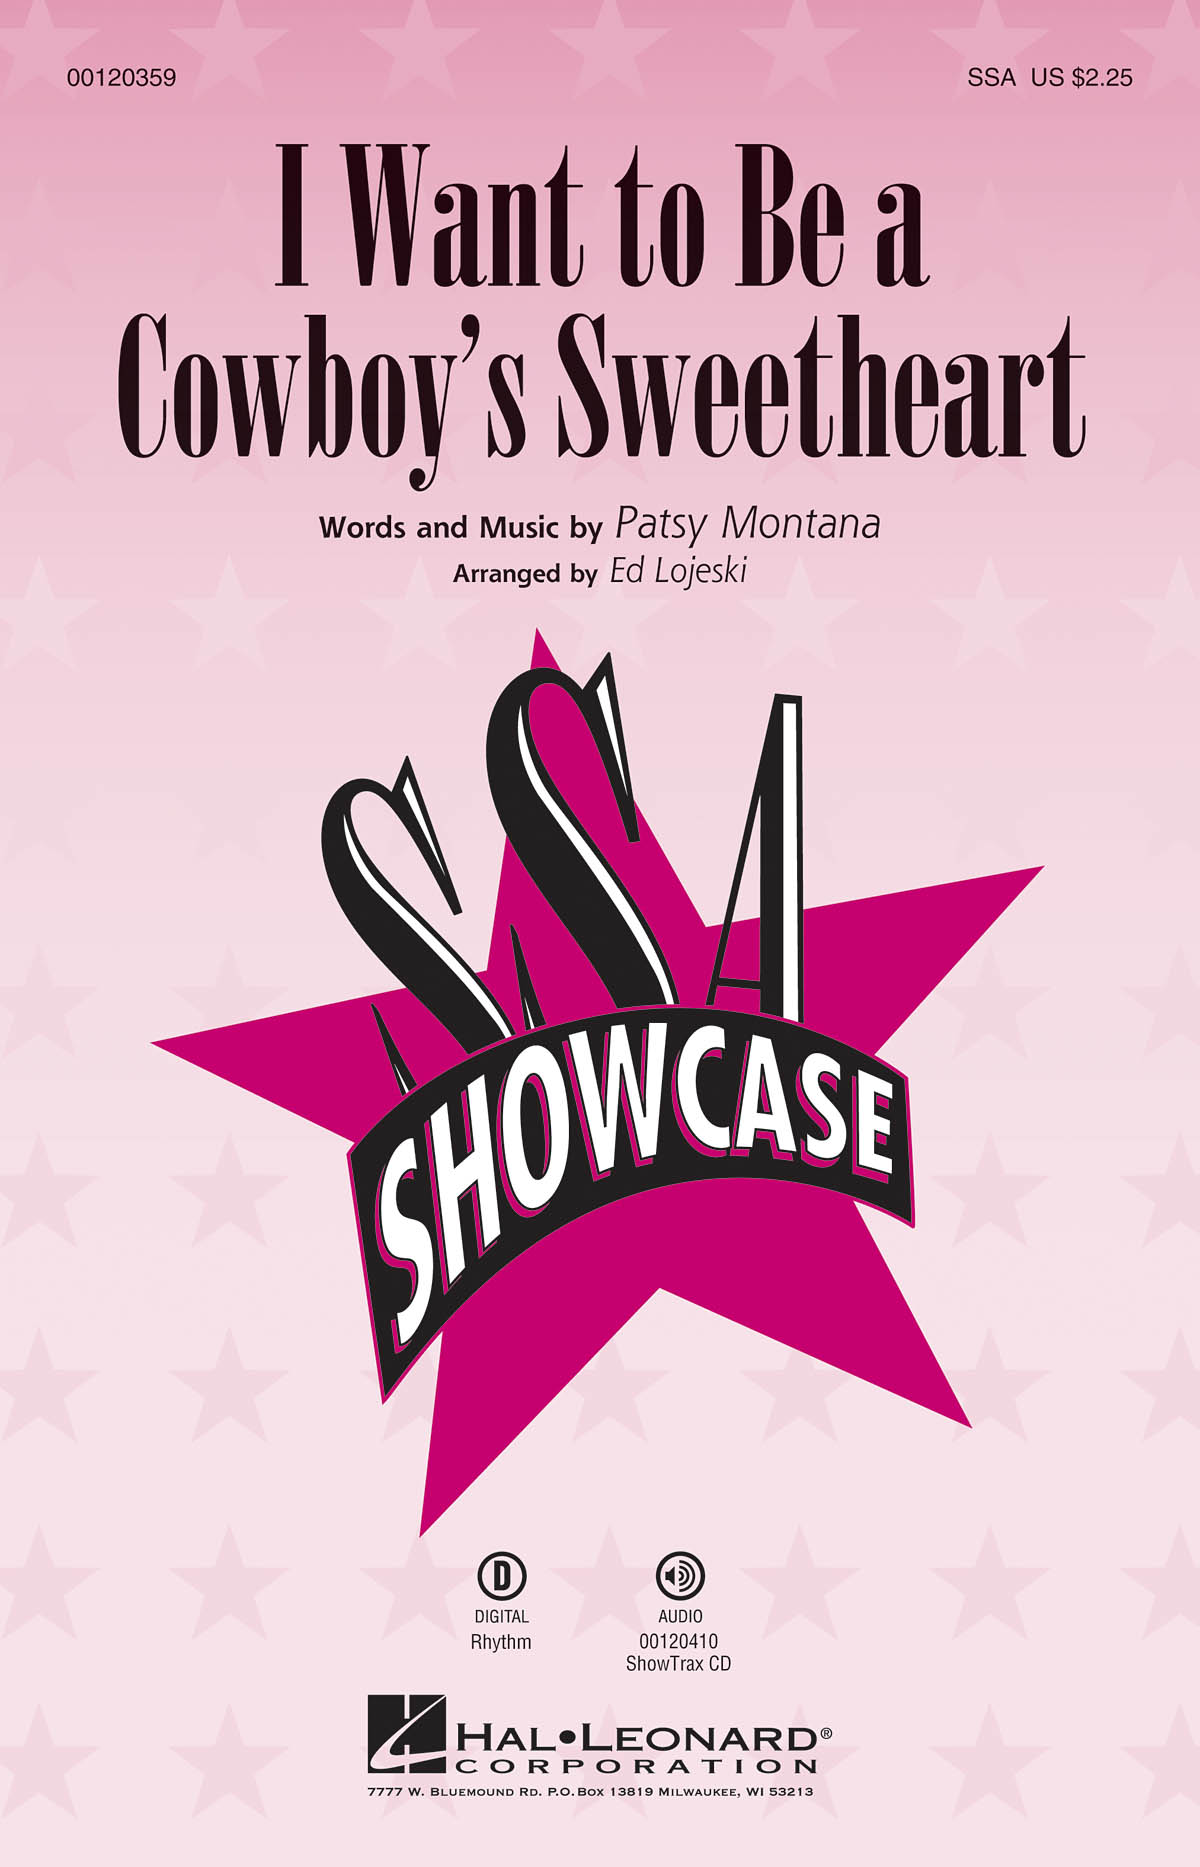 I Want to Be a Cowboy's Sweetheart